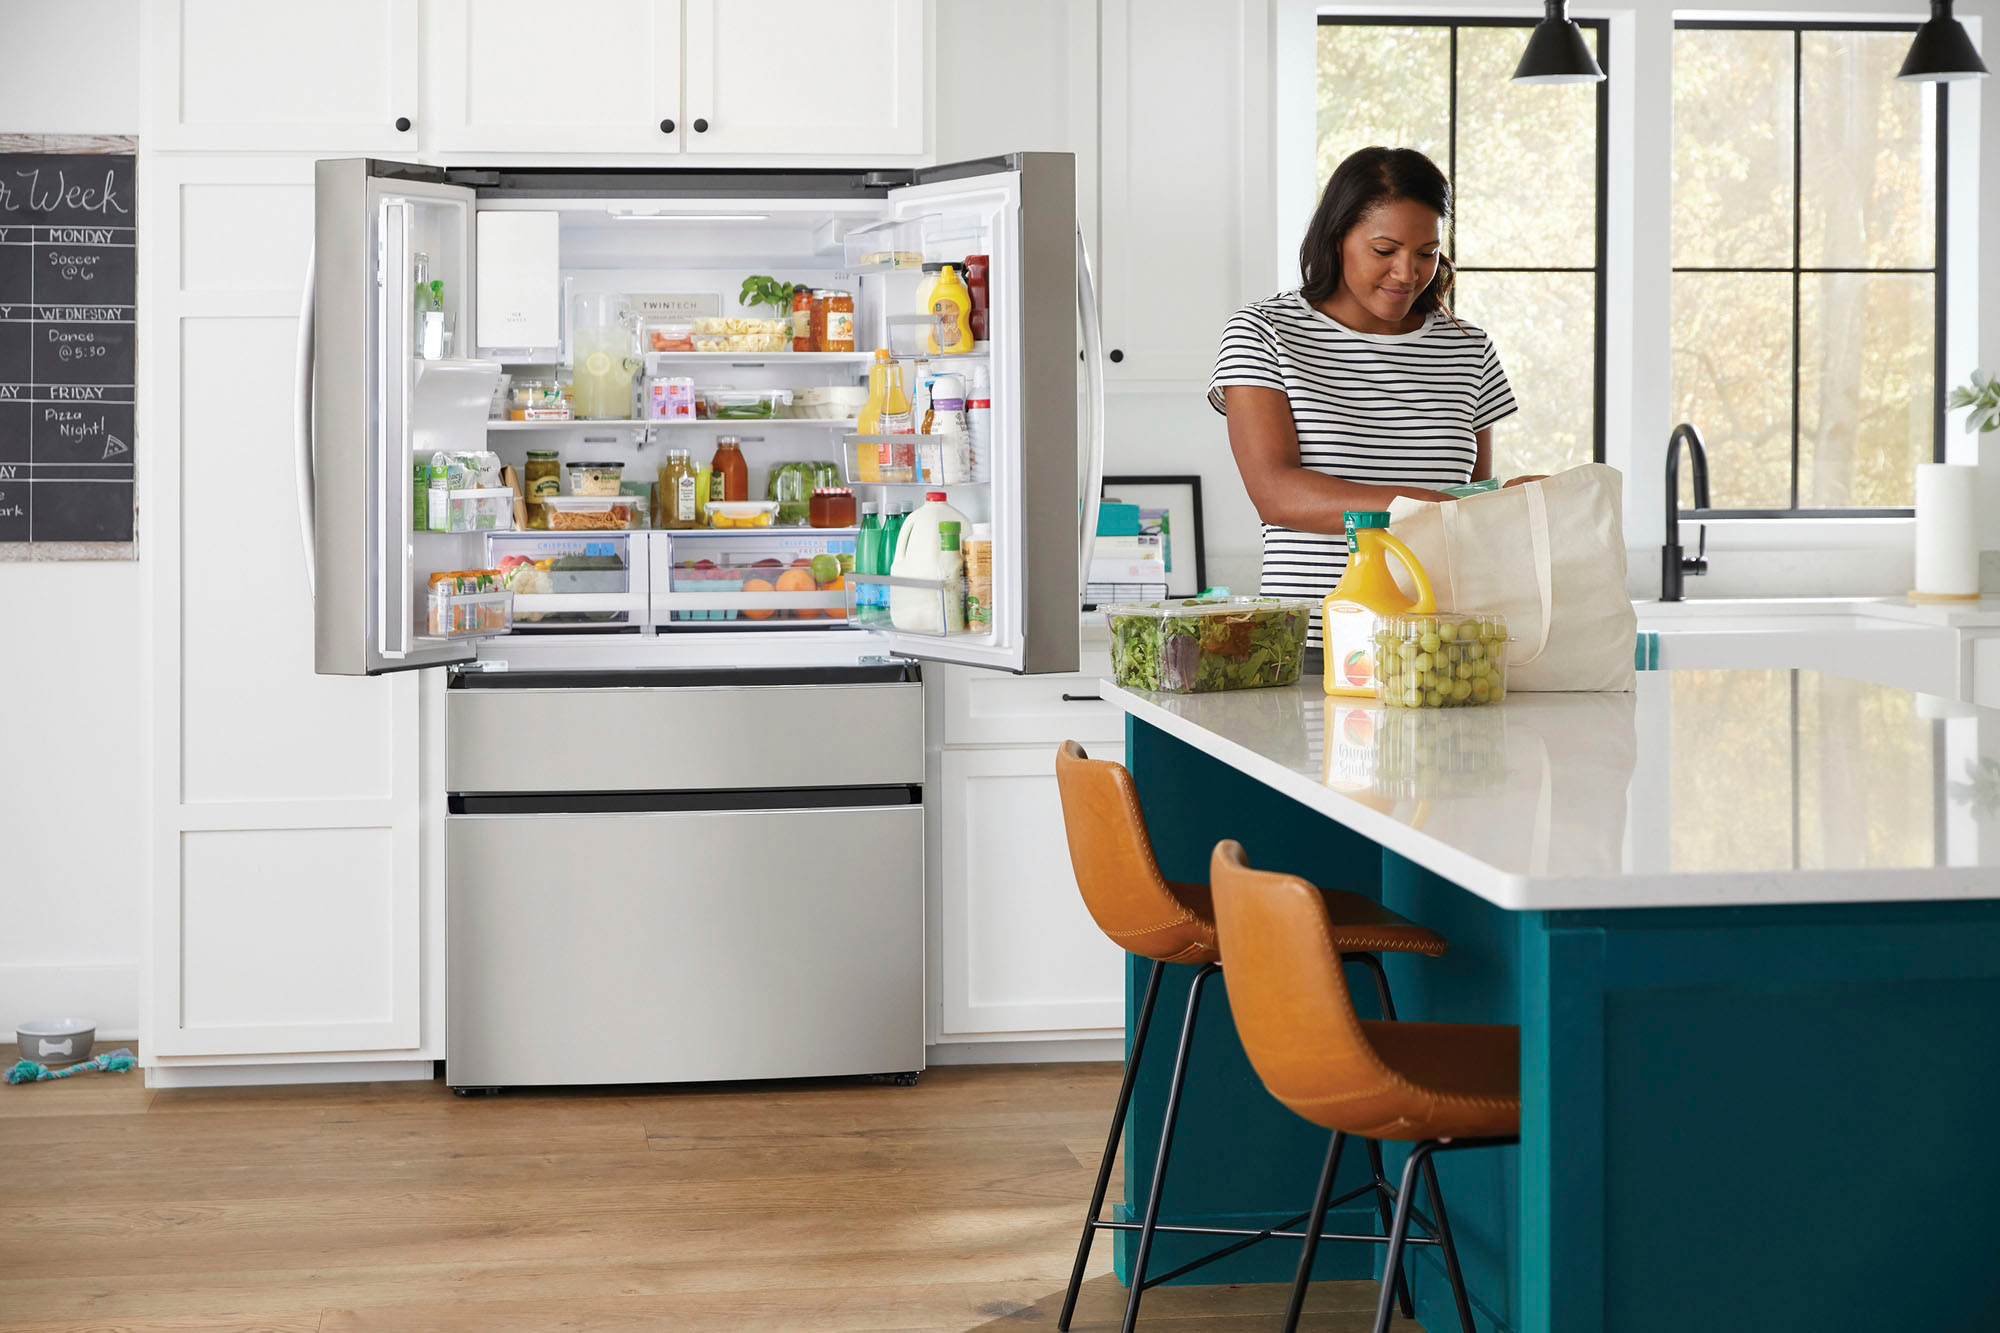 The Advantages of Upgrading to a Counter Depth Refrigerator